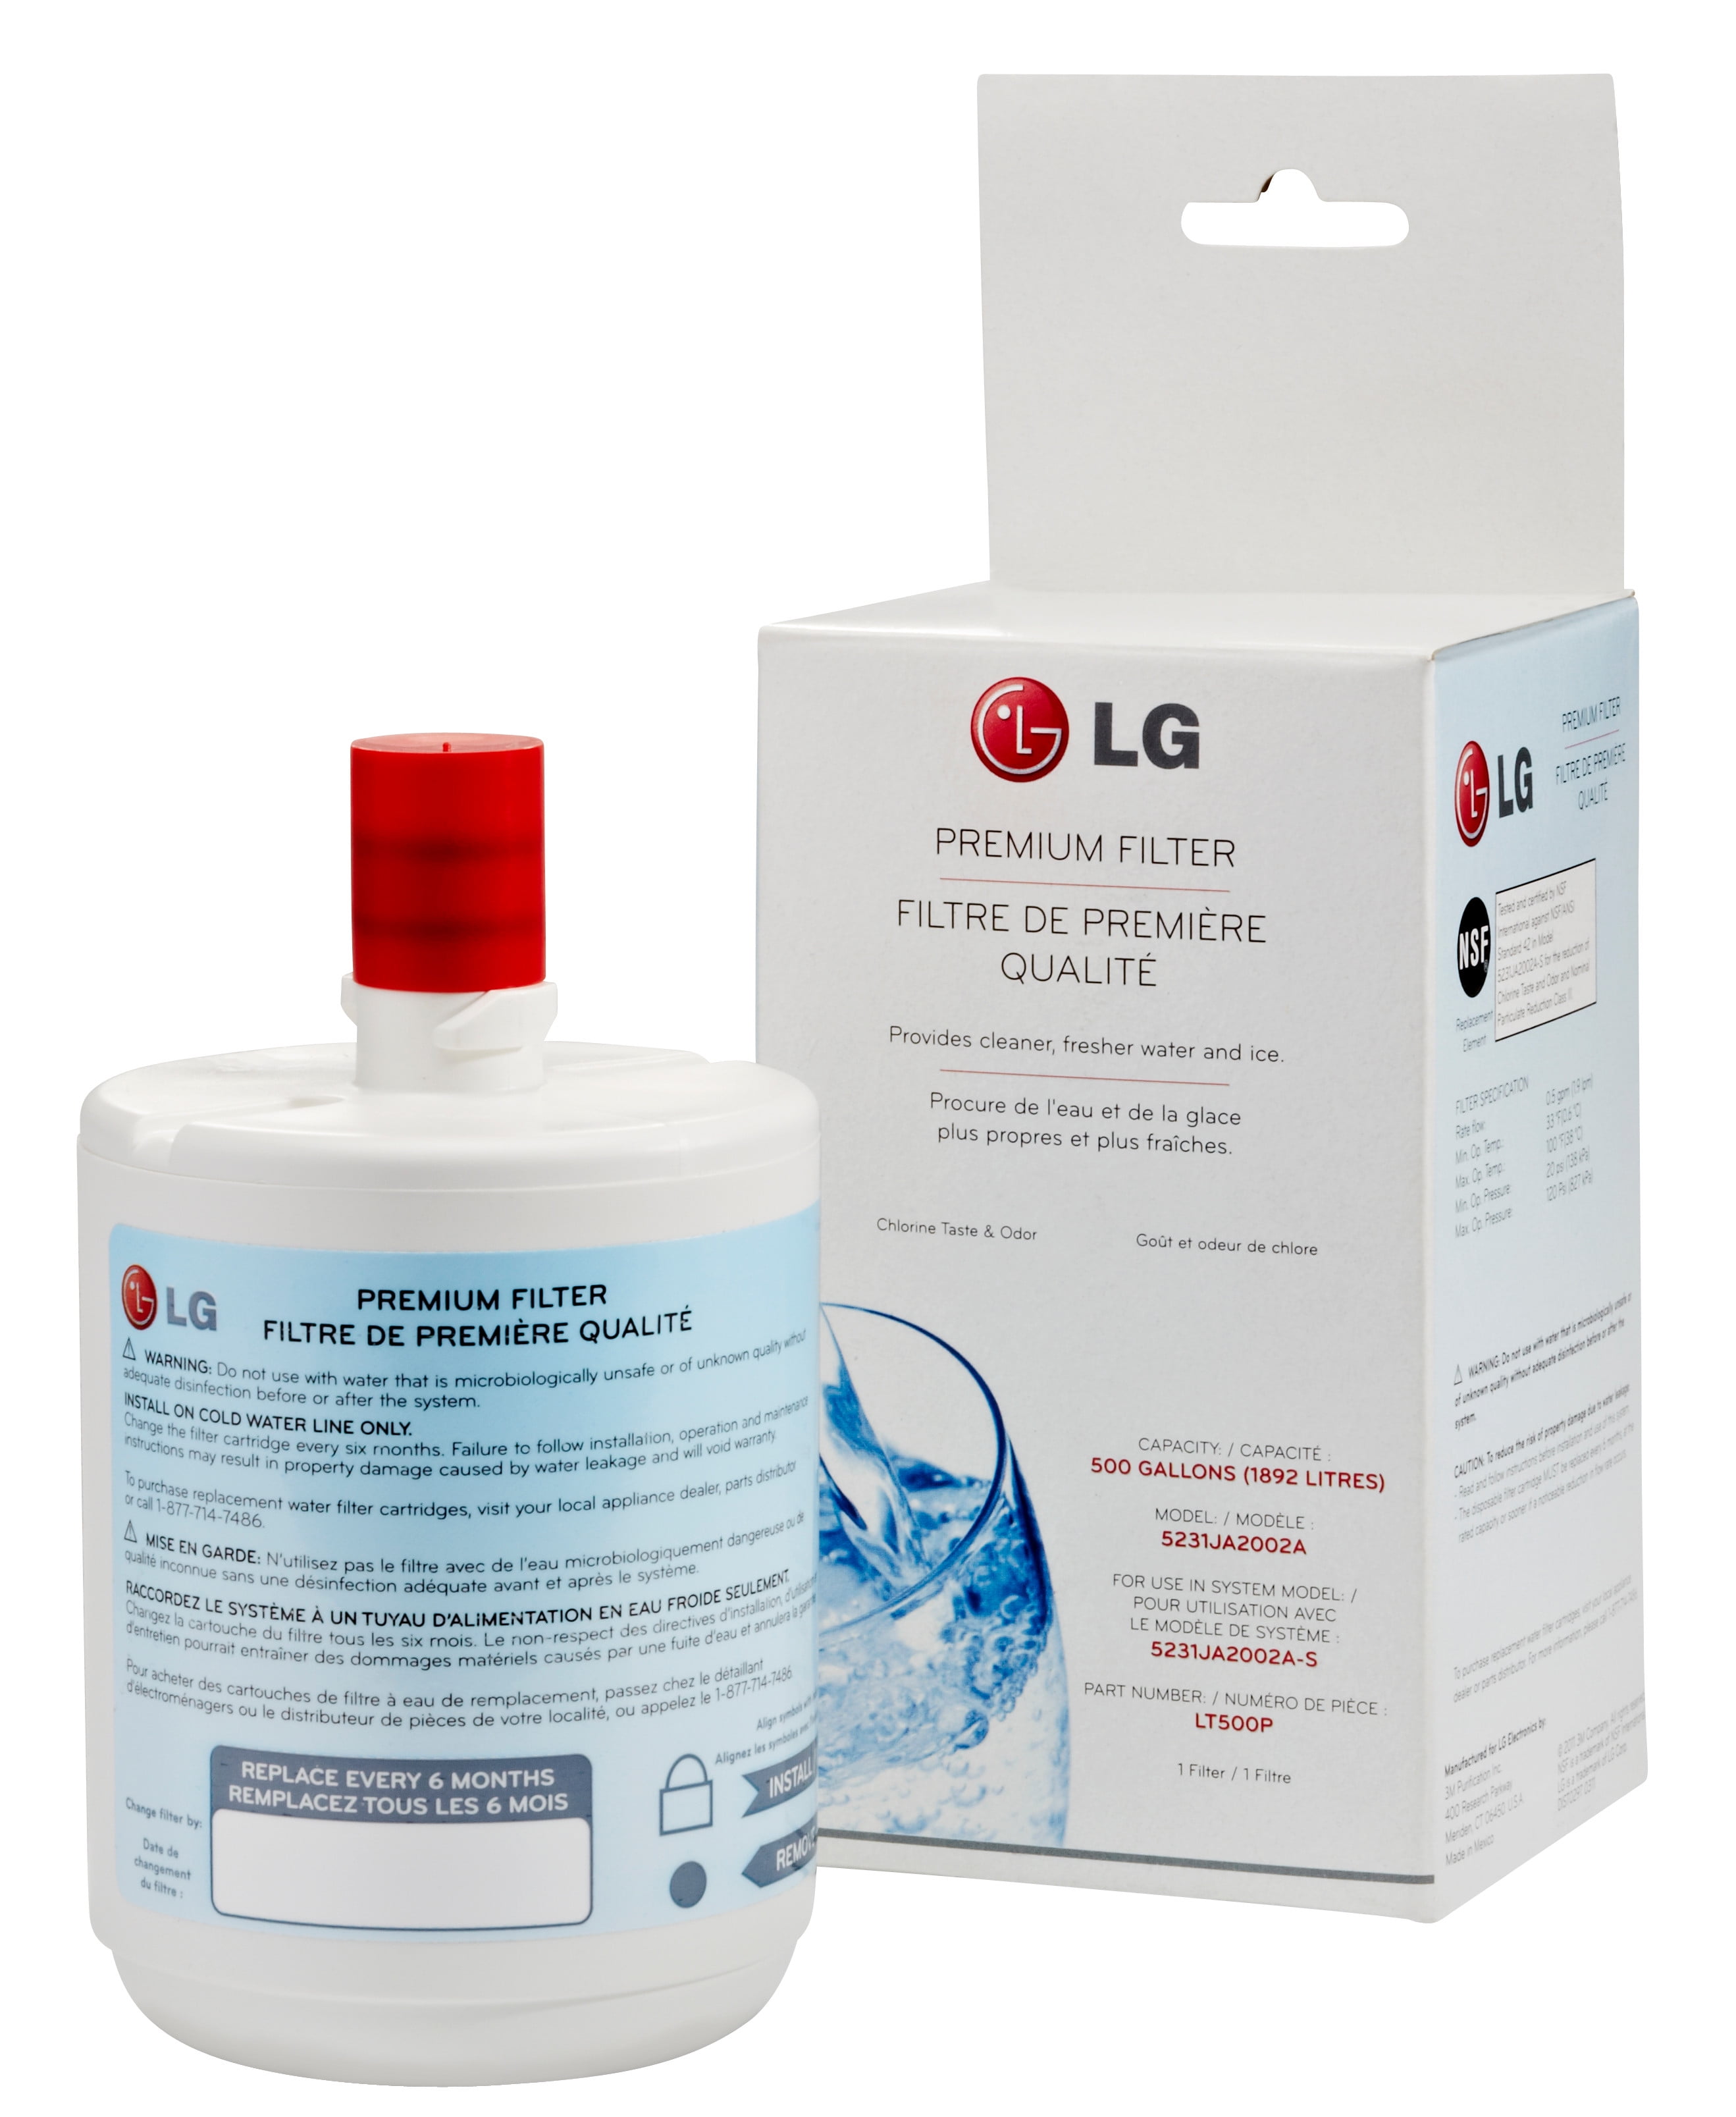 Details about   LG Refrigerator Water Filter LT500PC lot of 2 